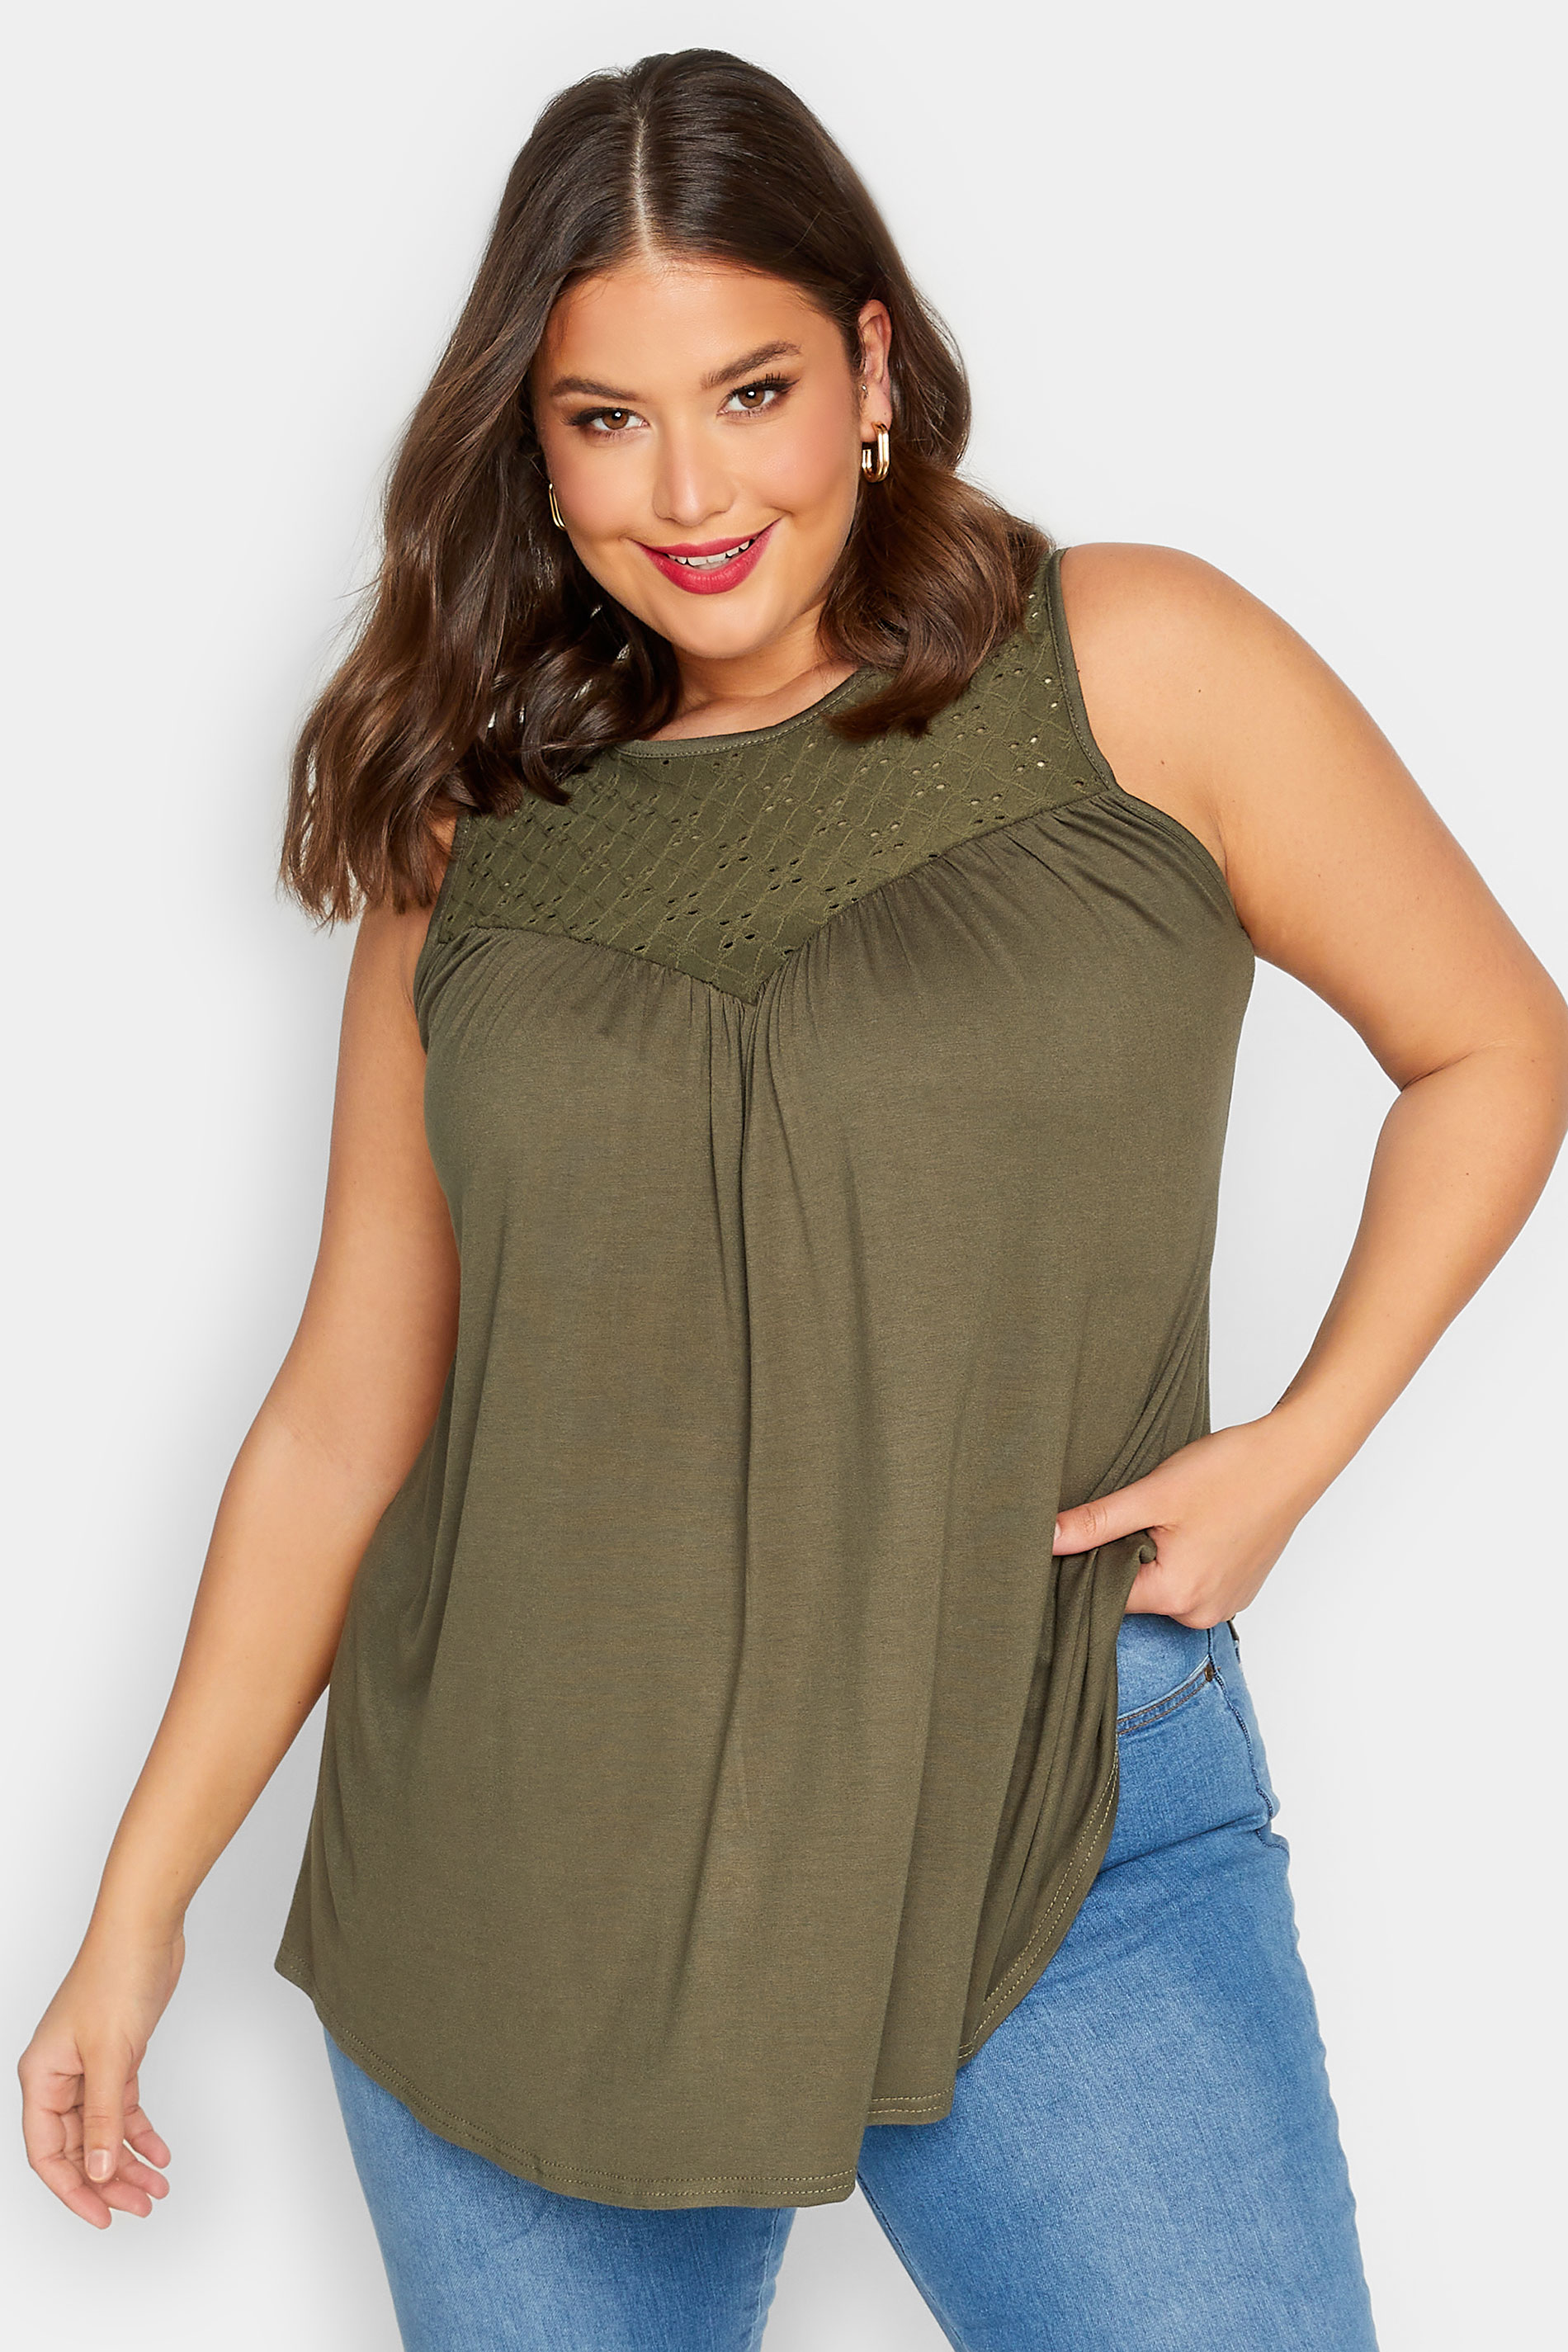 LIMITED COLLECTION Plus Size Khaki Green Broderie Anglaise Insert Vest Top | Yours Clothing 1